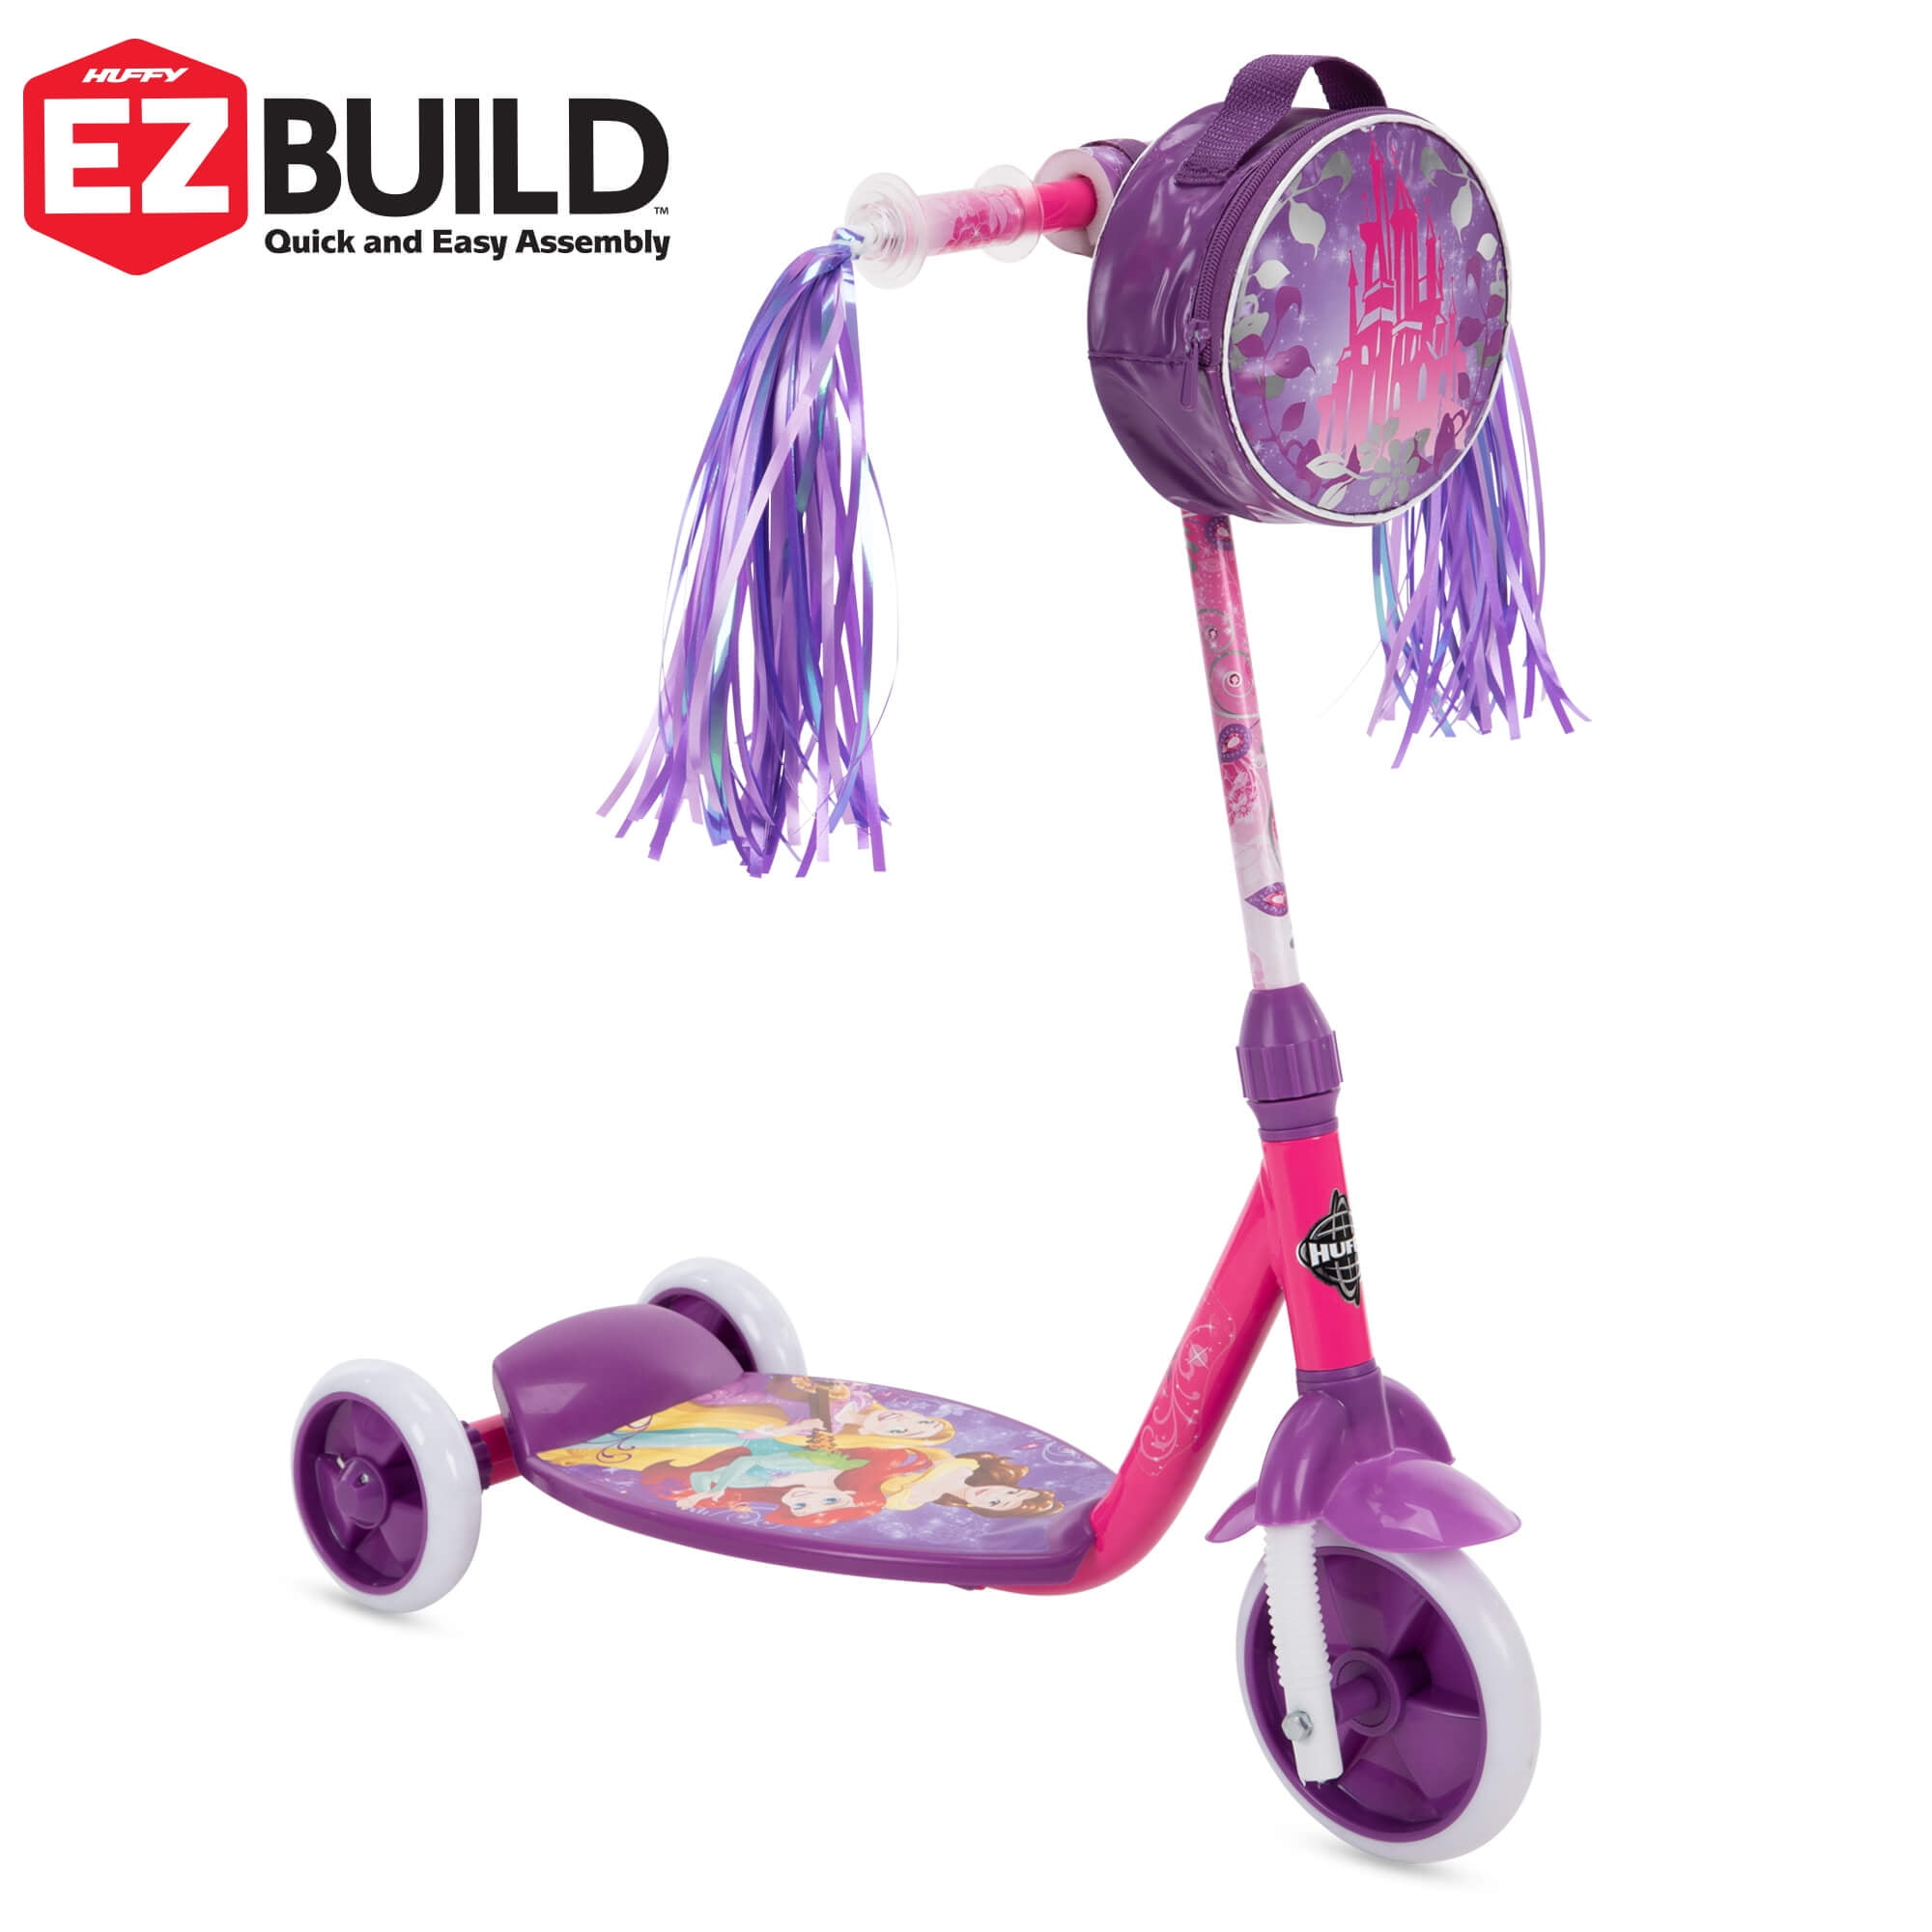 Razor Jr 3-Wheel Lil' Kick Scooter - For Ages 3 and up, Pink 